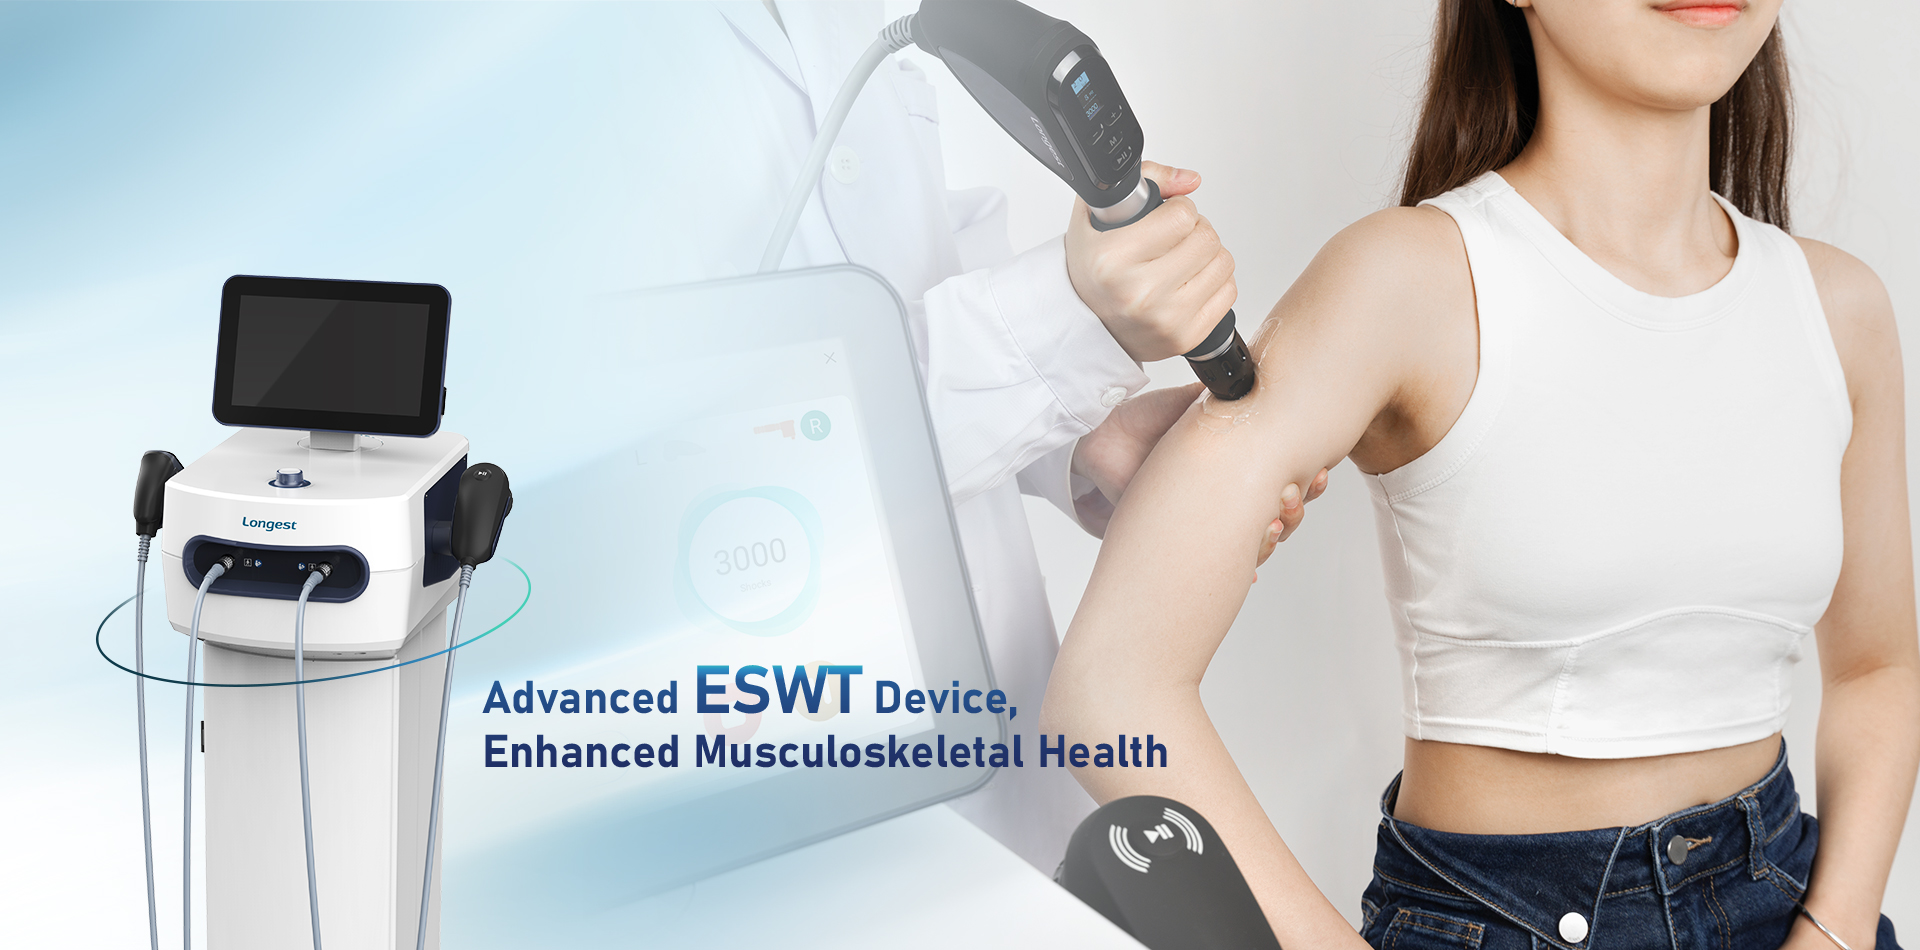 Advanced ESWT Device, Enhanced Musculoskeletal Health